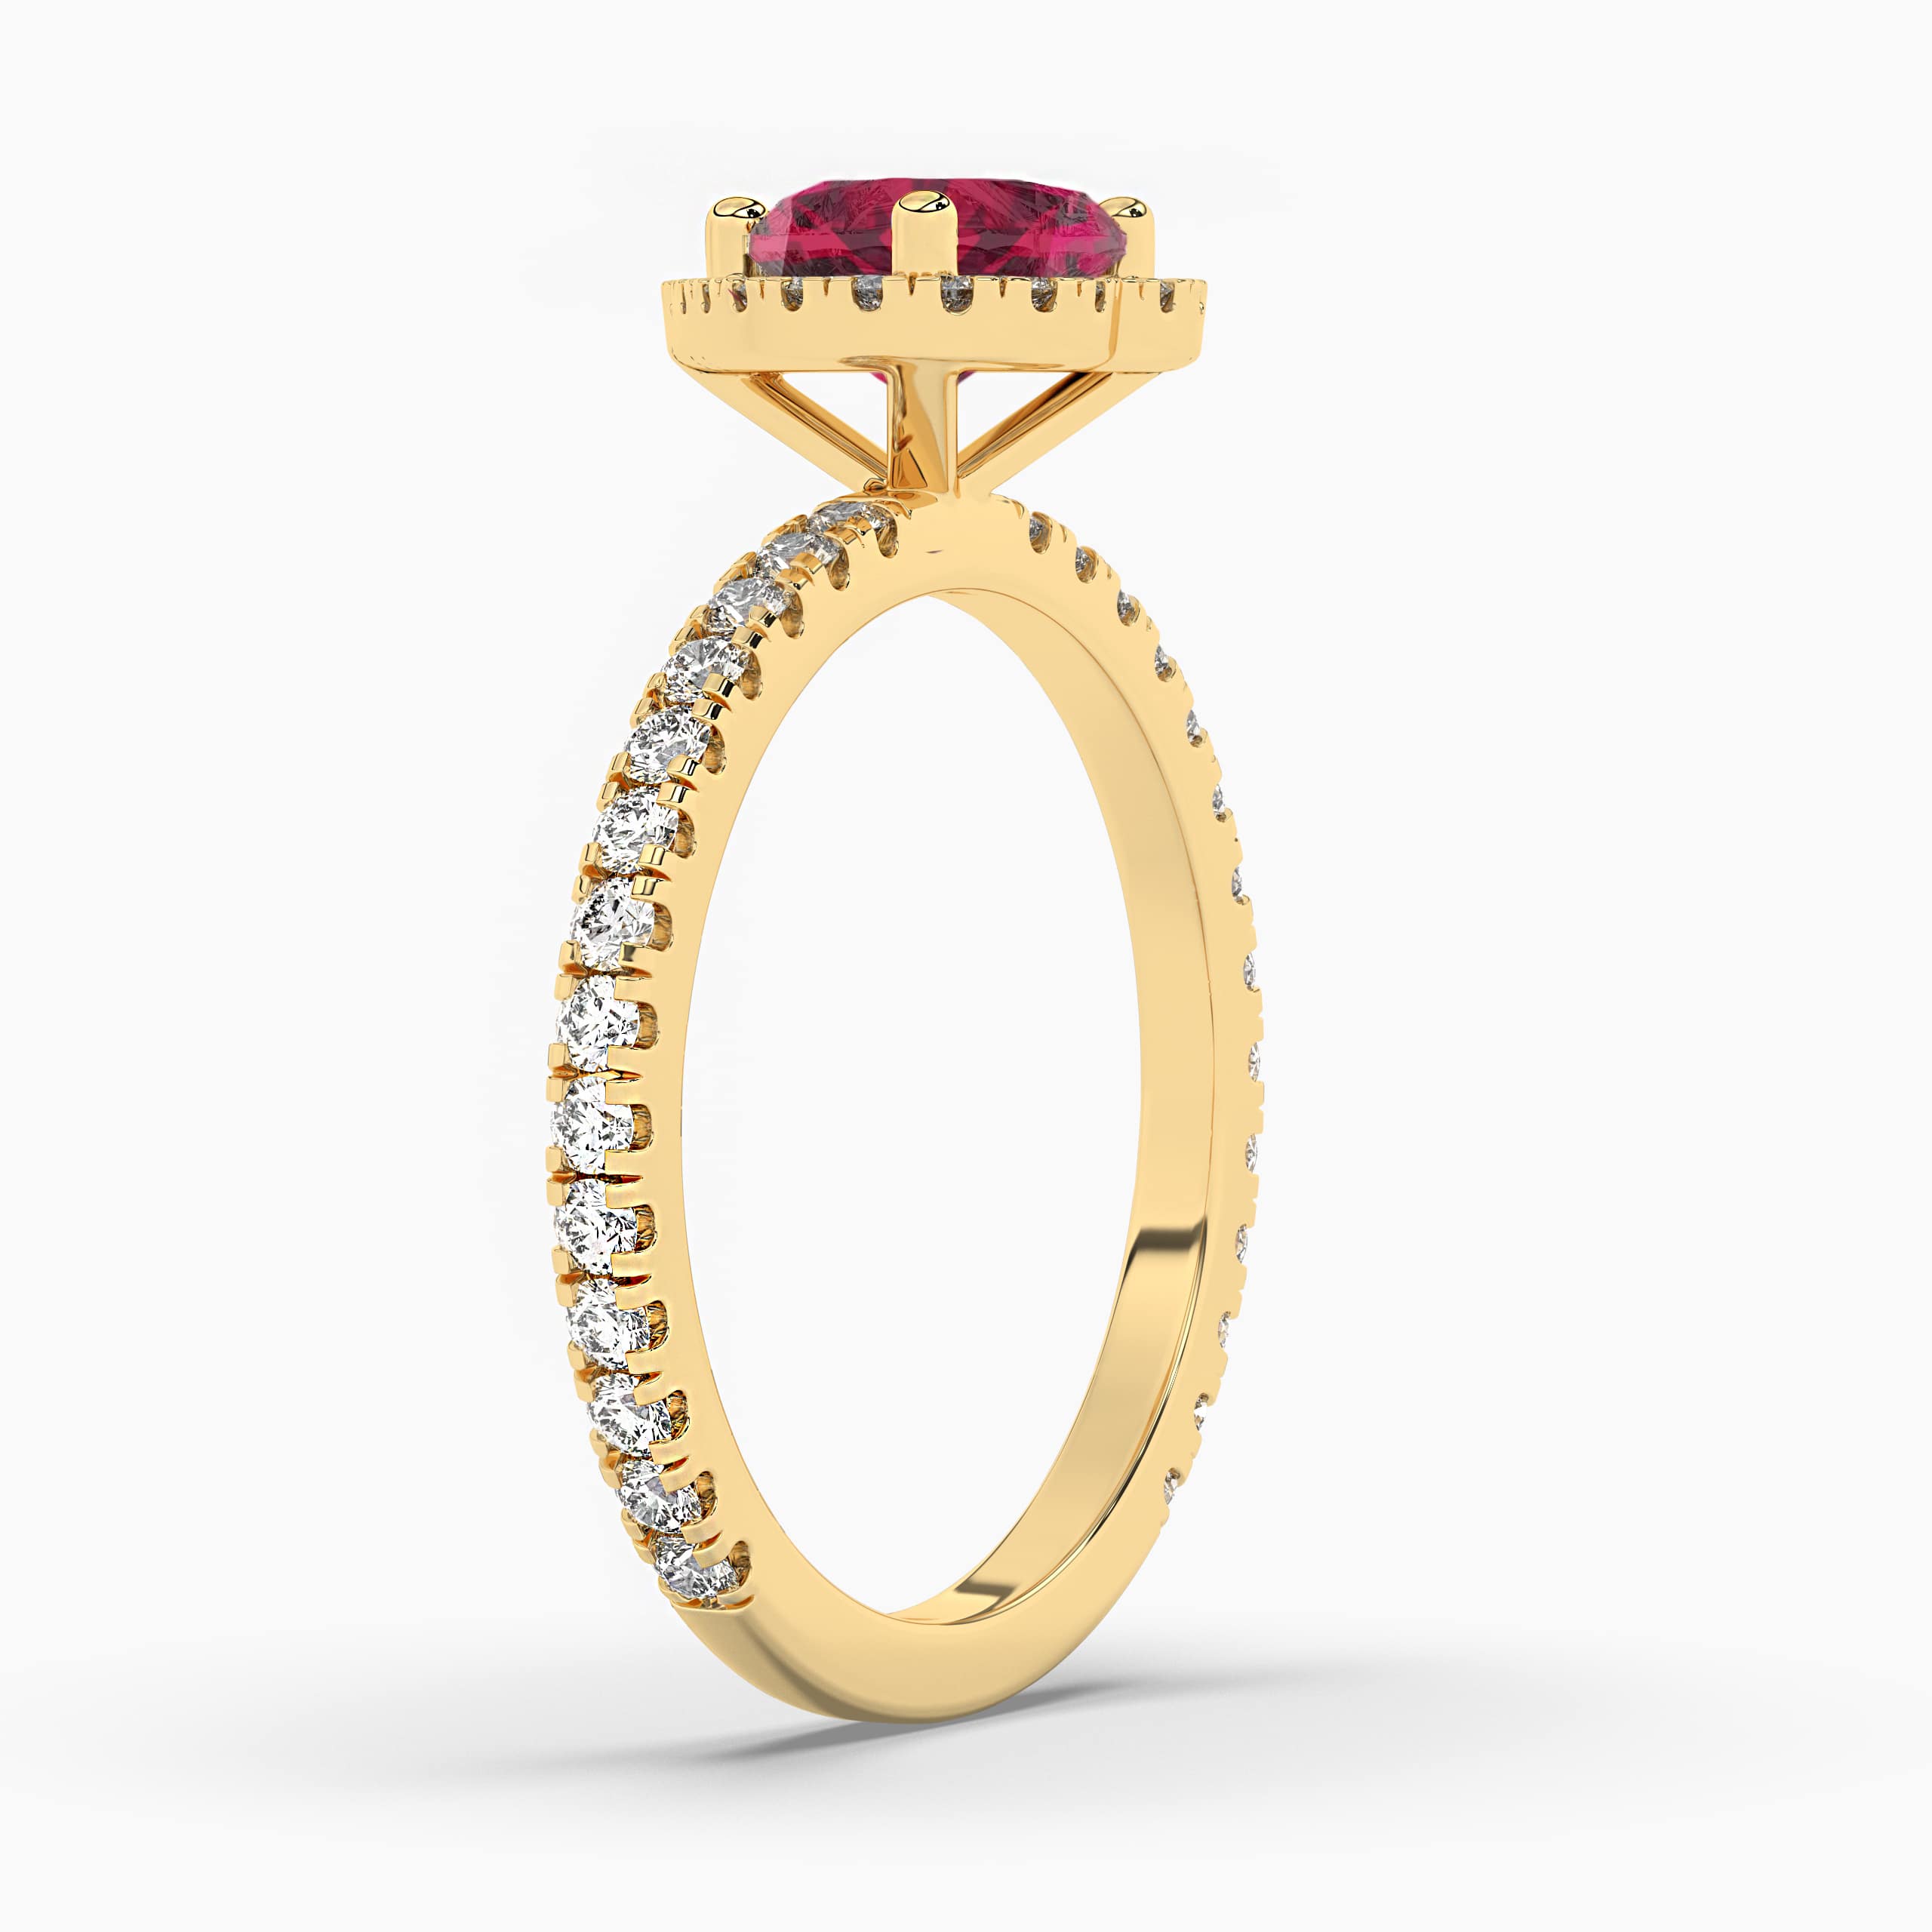 HEART SHAPED RUBY & DIAMOND HALO ENGAGEMENT RING YELLOW GOLD